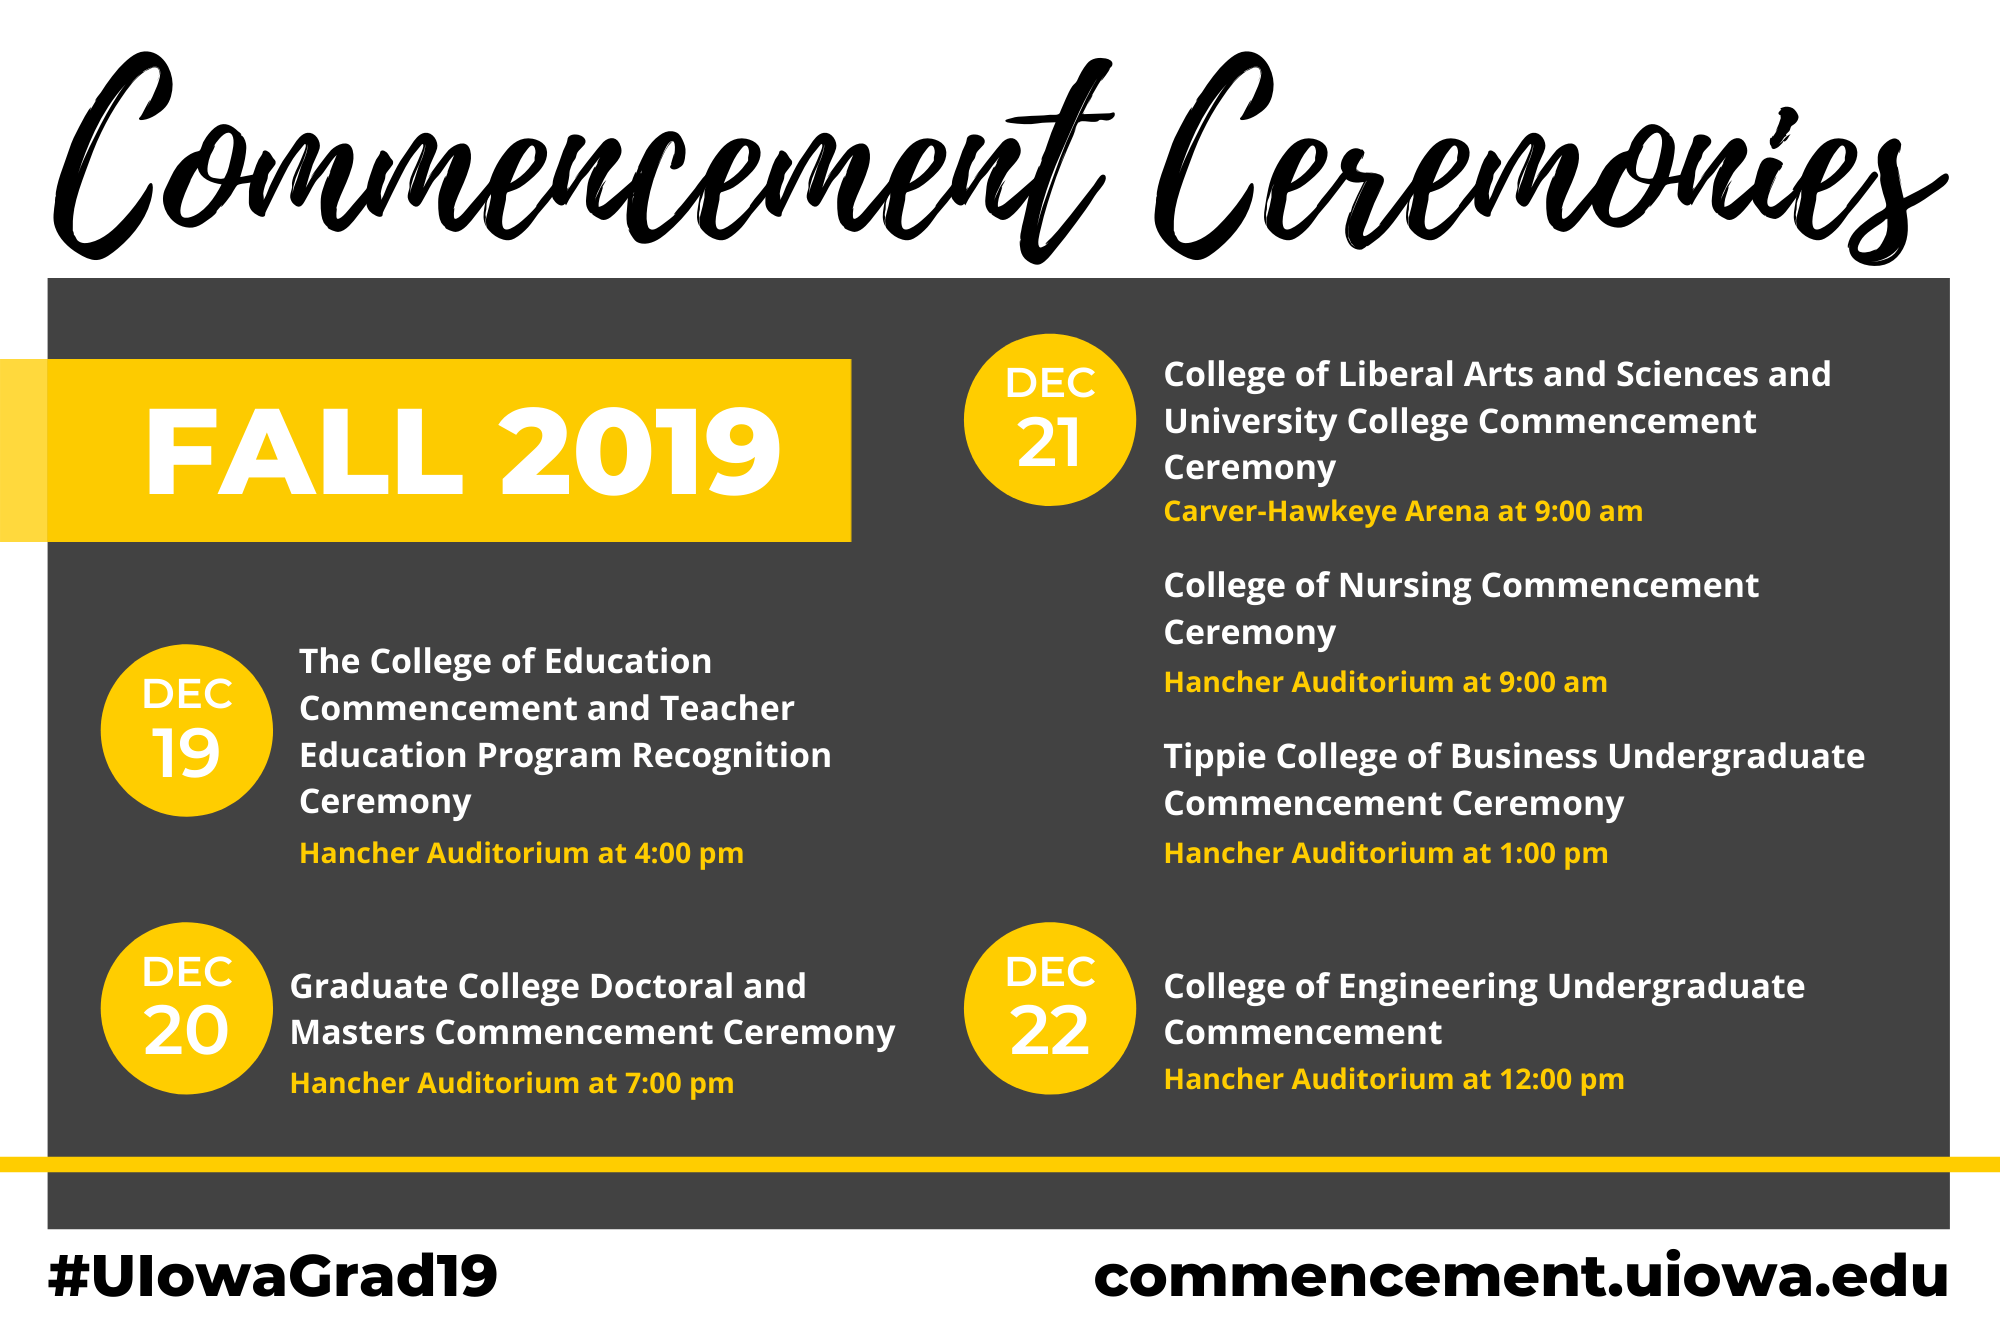 Commencement ceremonies - Fall